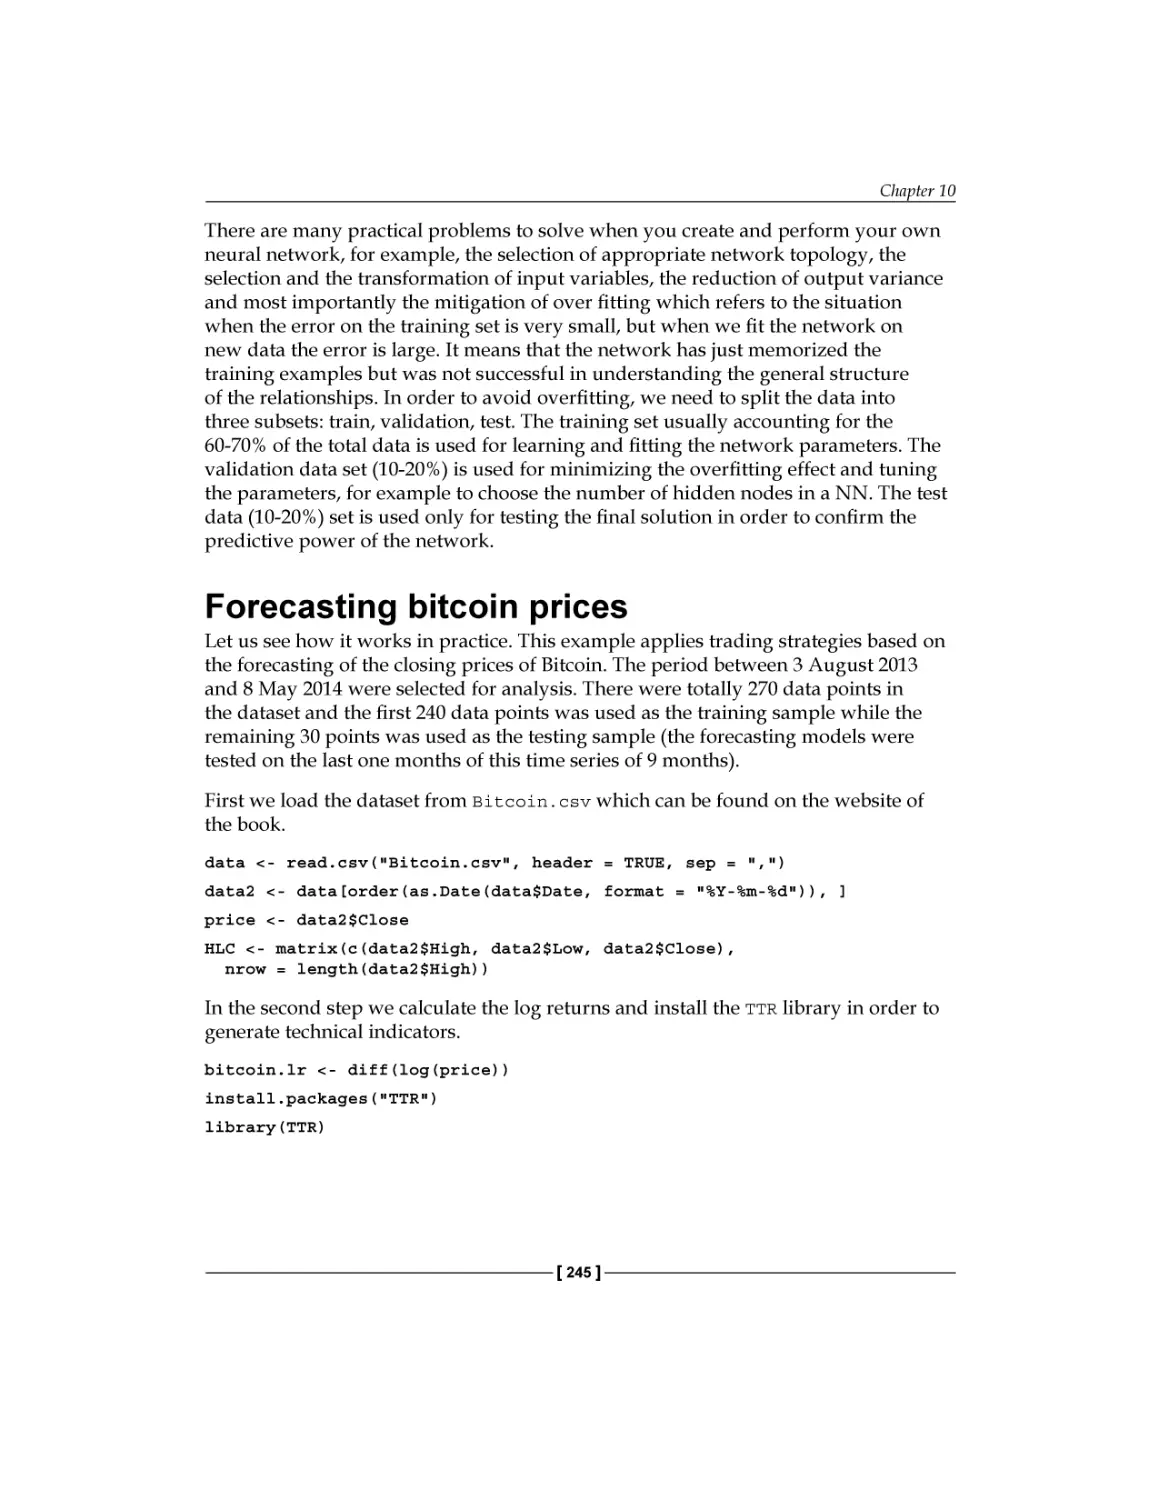 Forecasting Bitcoin prices